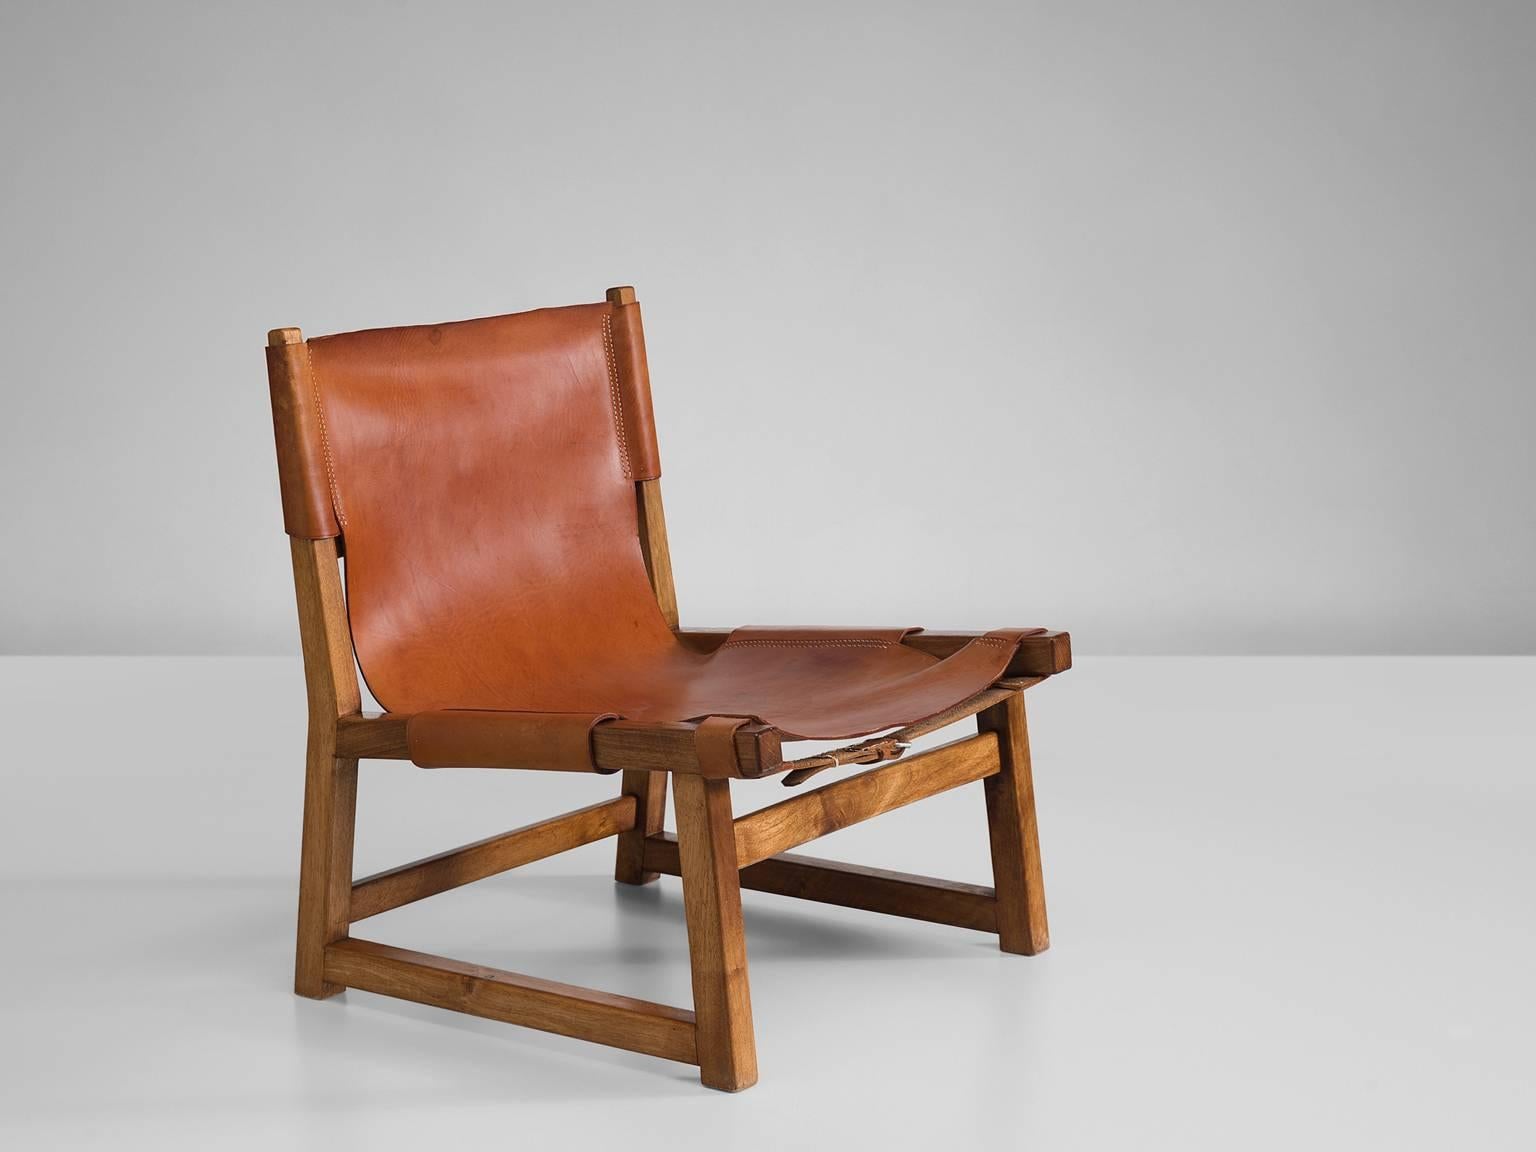 Hunting chair, oak and leather, 1950s, Denmark

This strong and sturdy low lounge chair is unmistakably Danish. The design of this hunting chair, with it leather loosely attached to the frame by means of straps that go around the frame and that